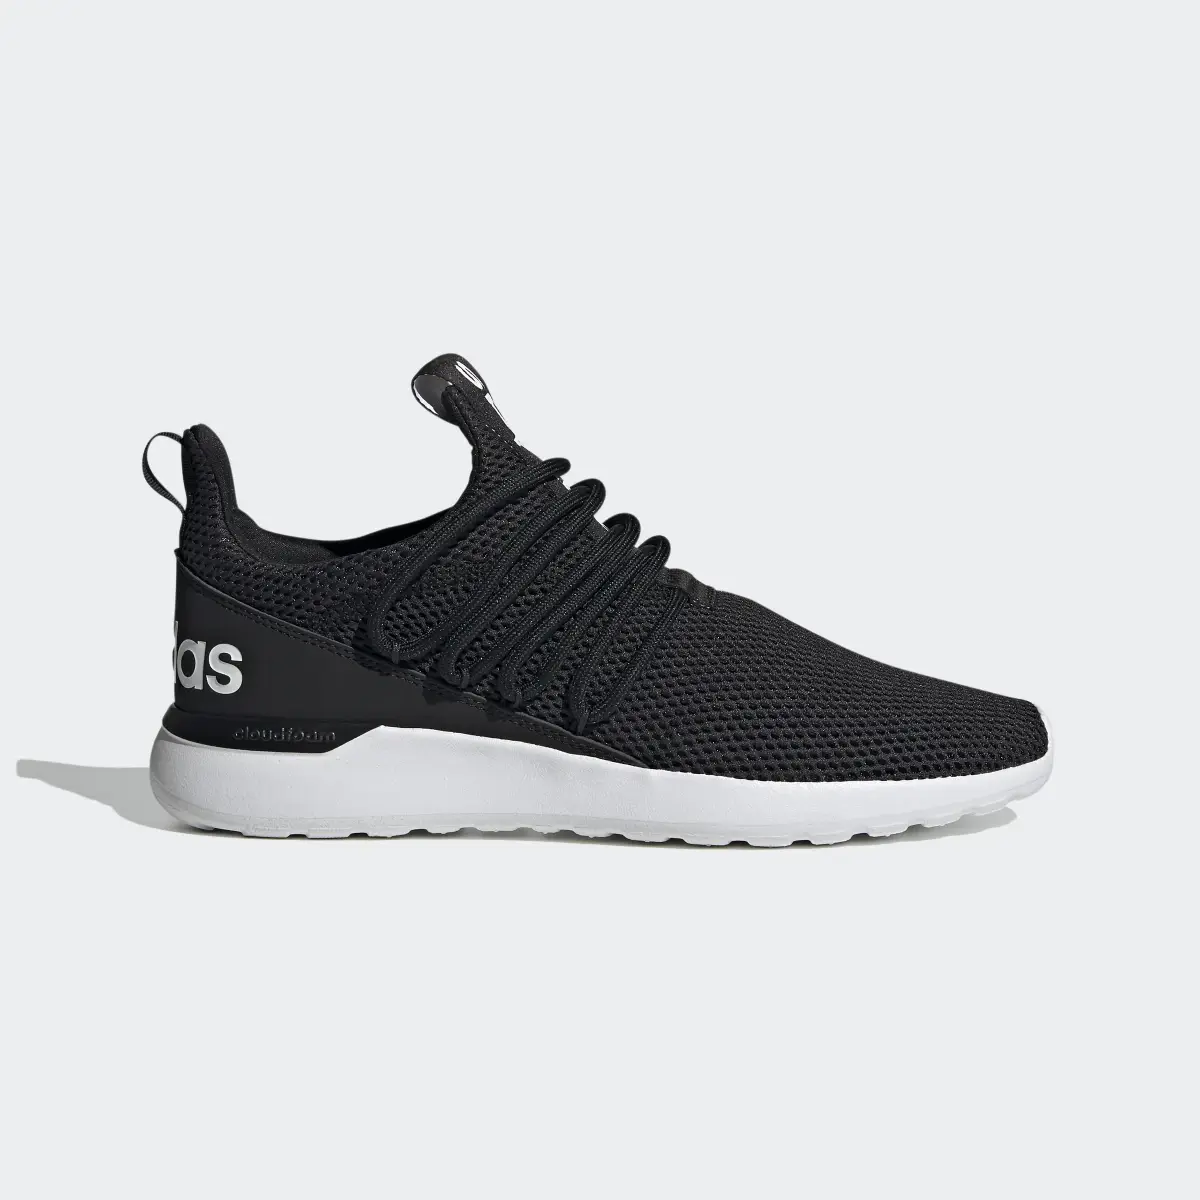 Adidas Lite Racer Adapt 3.0 Shoes. 2